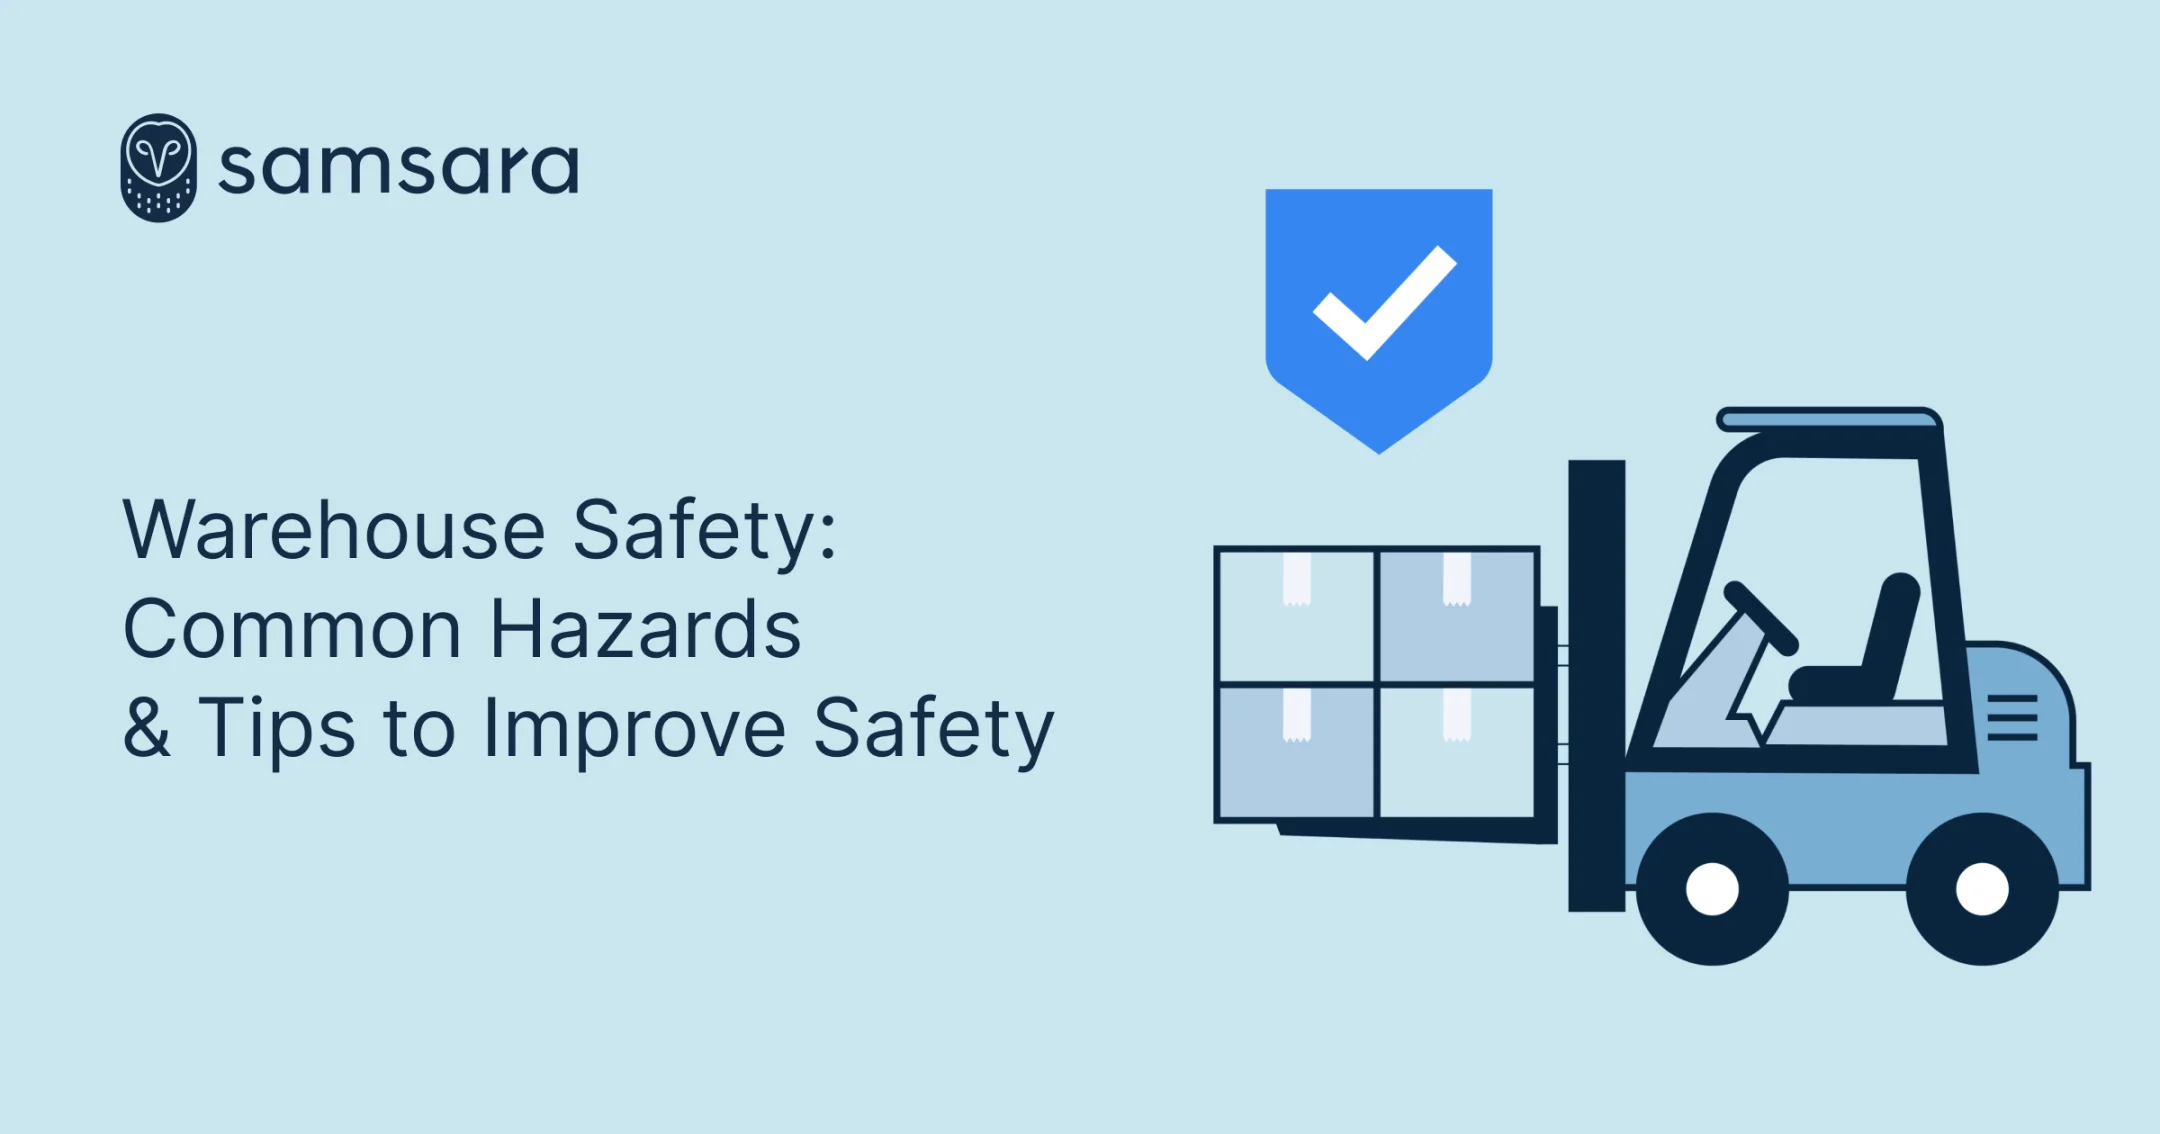 Learn about common warehouse safety hazards, OSHA’s warehouse safety guidelines, and tips to improve warehouse safety.